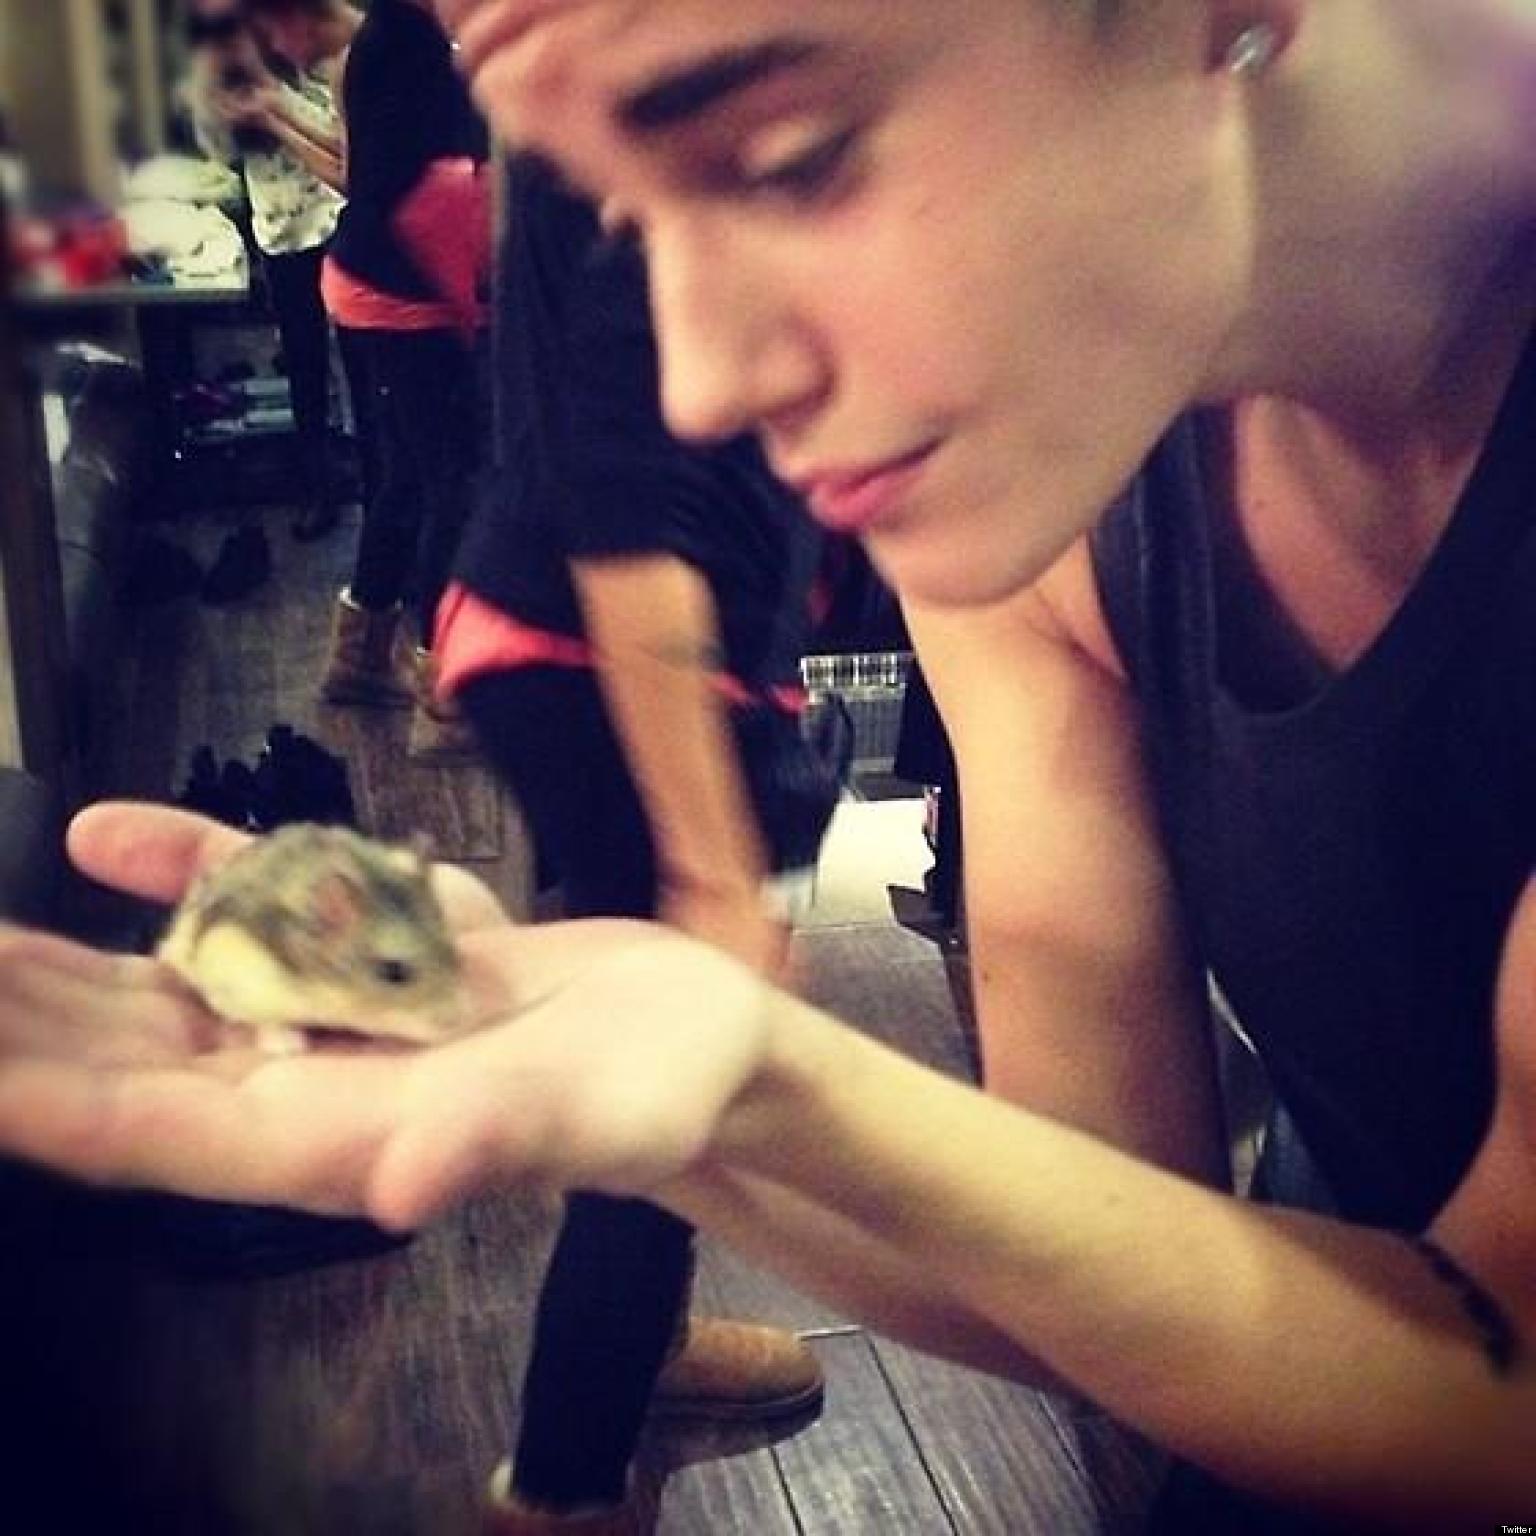 Justin Bieber Accused Of Animal Cruelty After Handing Pet Hamster To Screaming Fan1536 x 1536